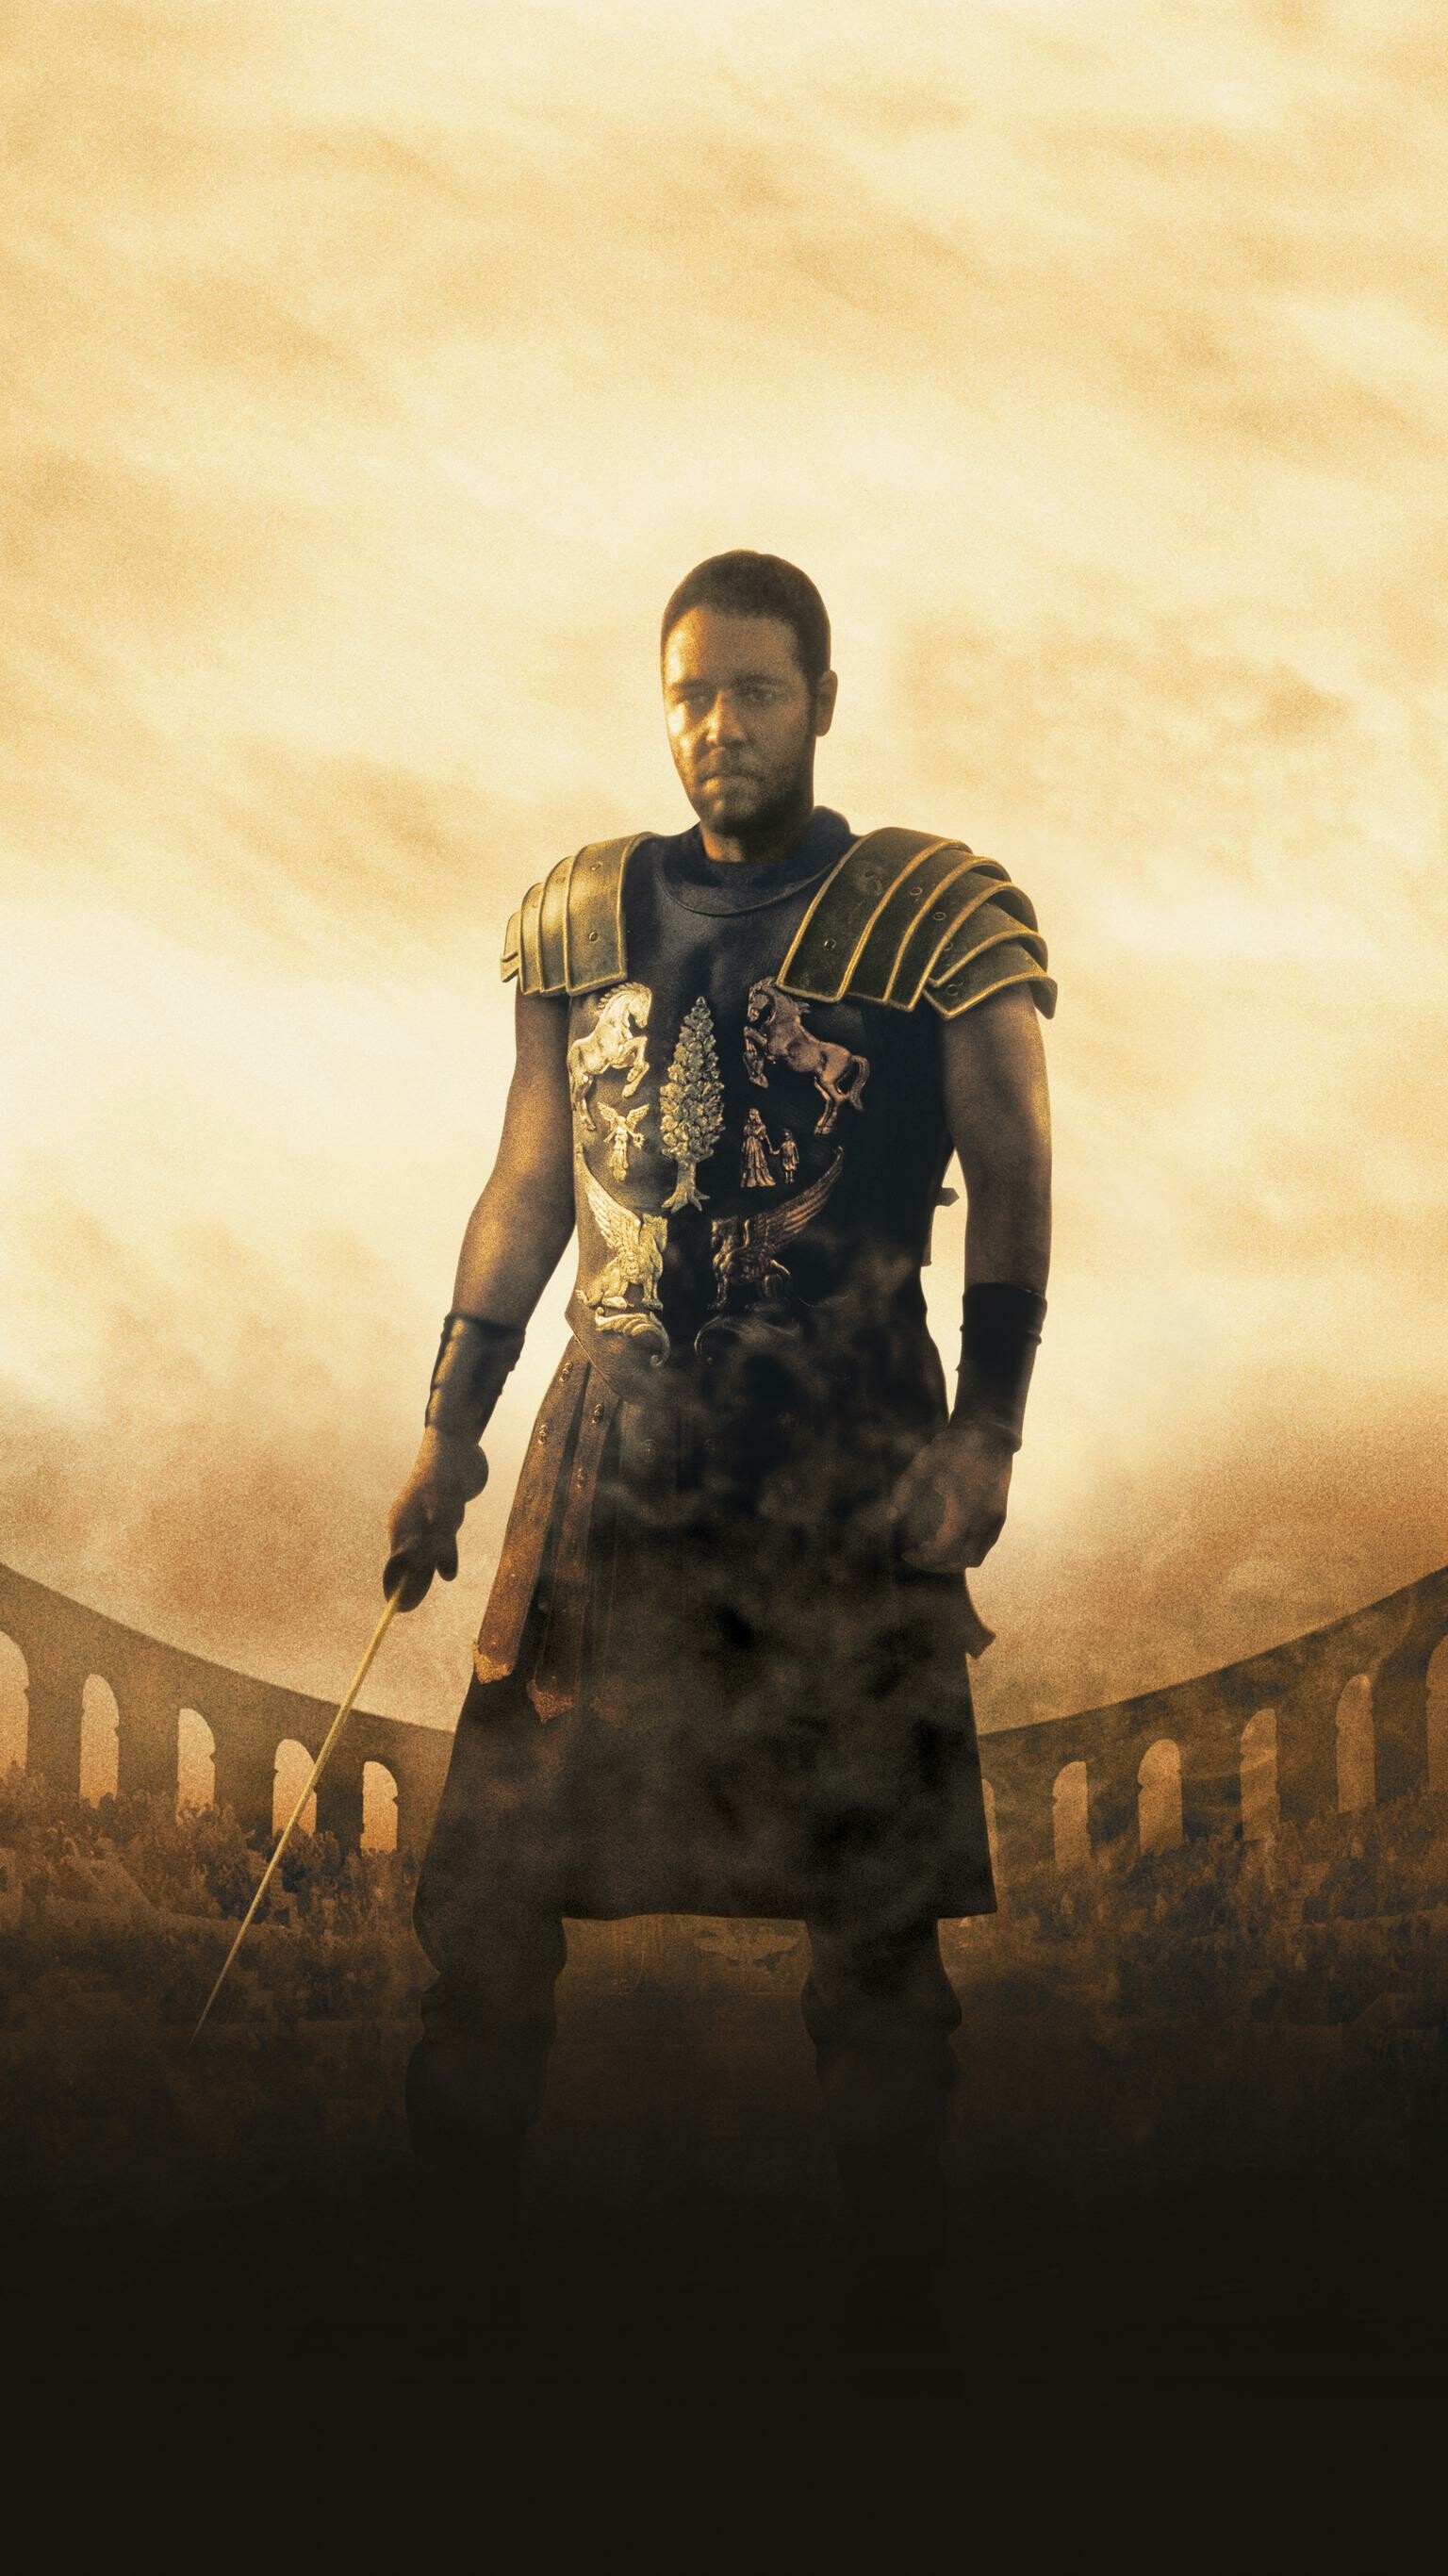 Gladiator: A 2000 epic historical drama film directed by Ridley Scott. 1540x2740 HD Wallpaper.